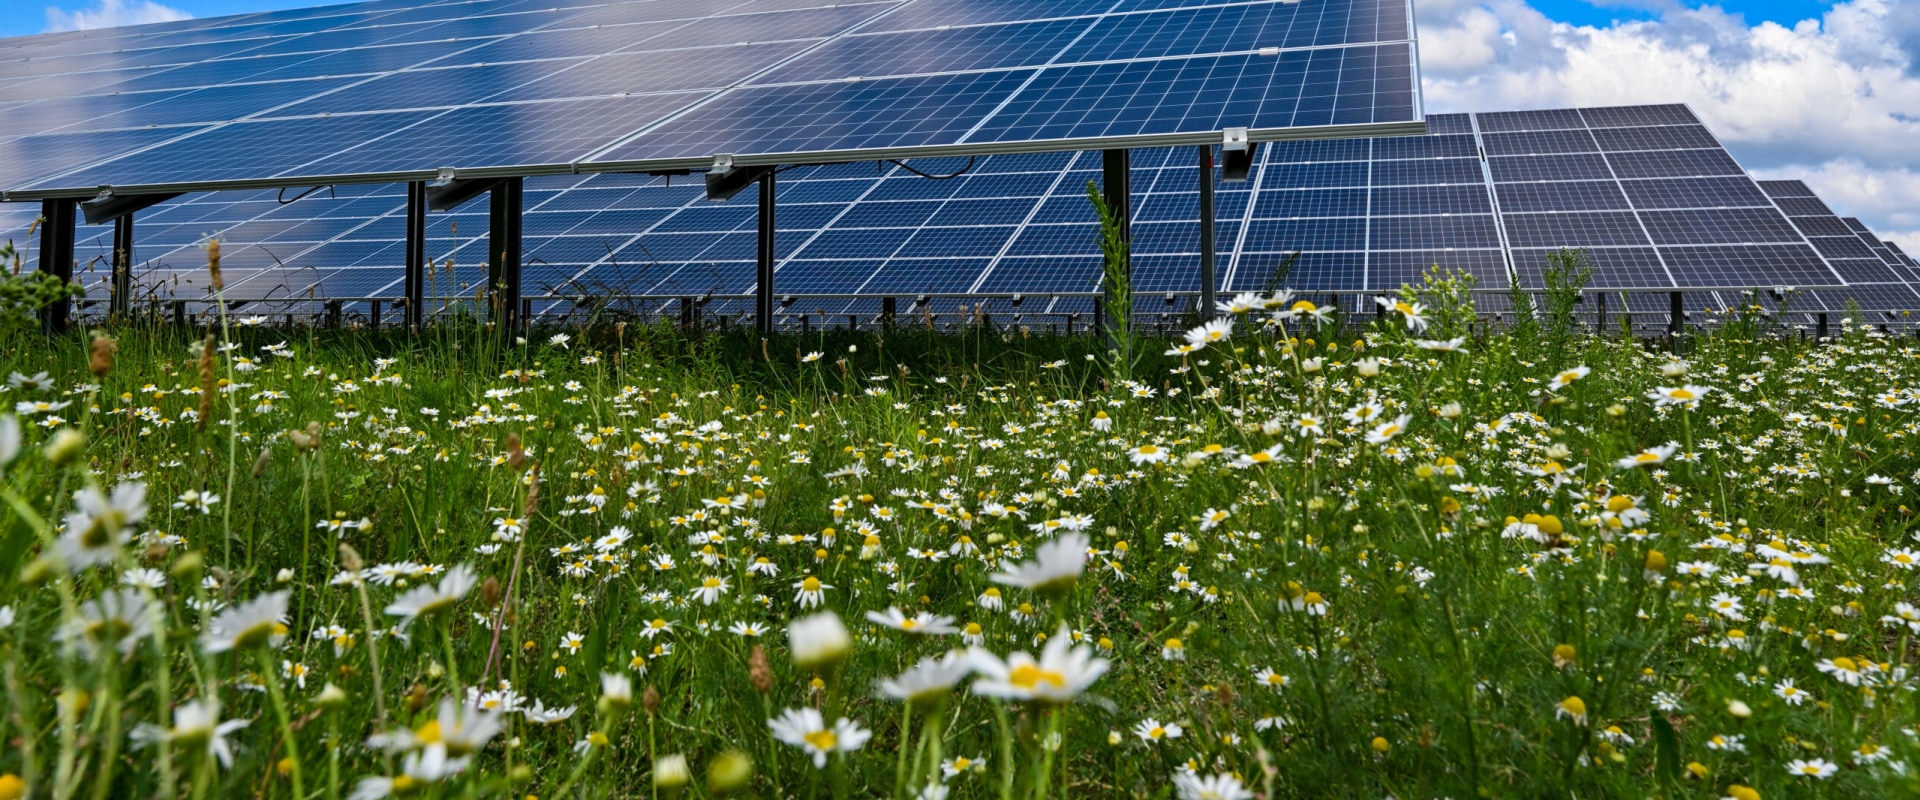 Is solar power as good as electricity?